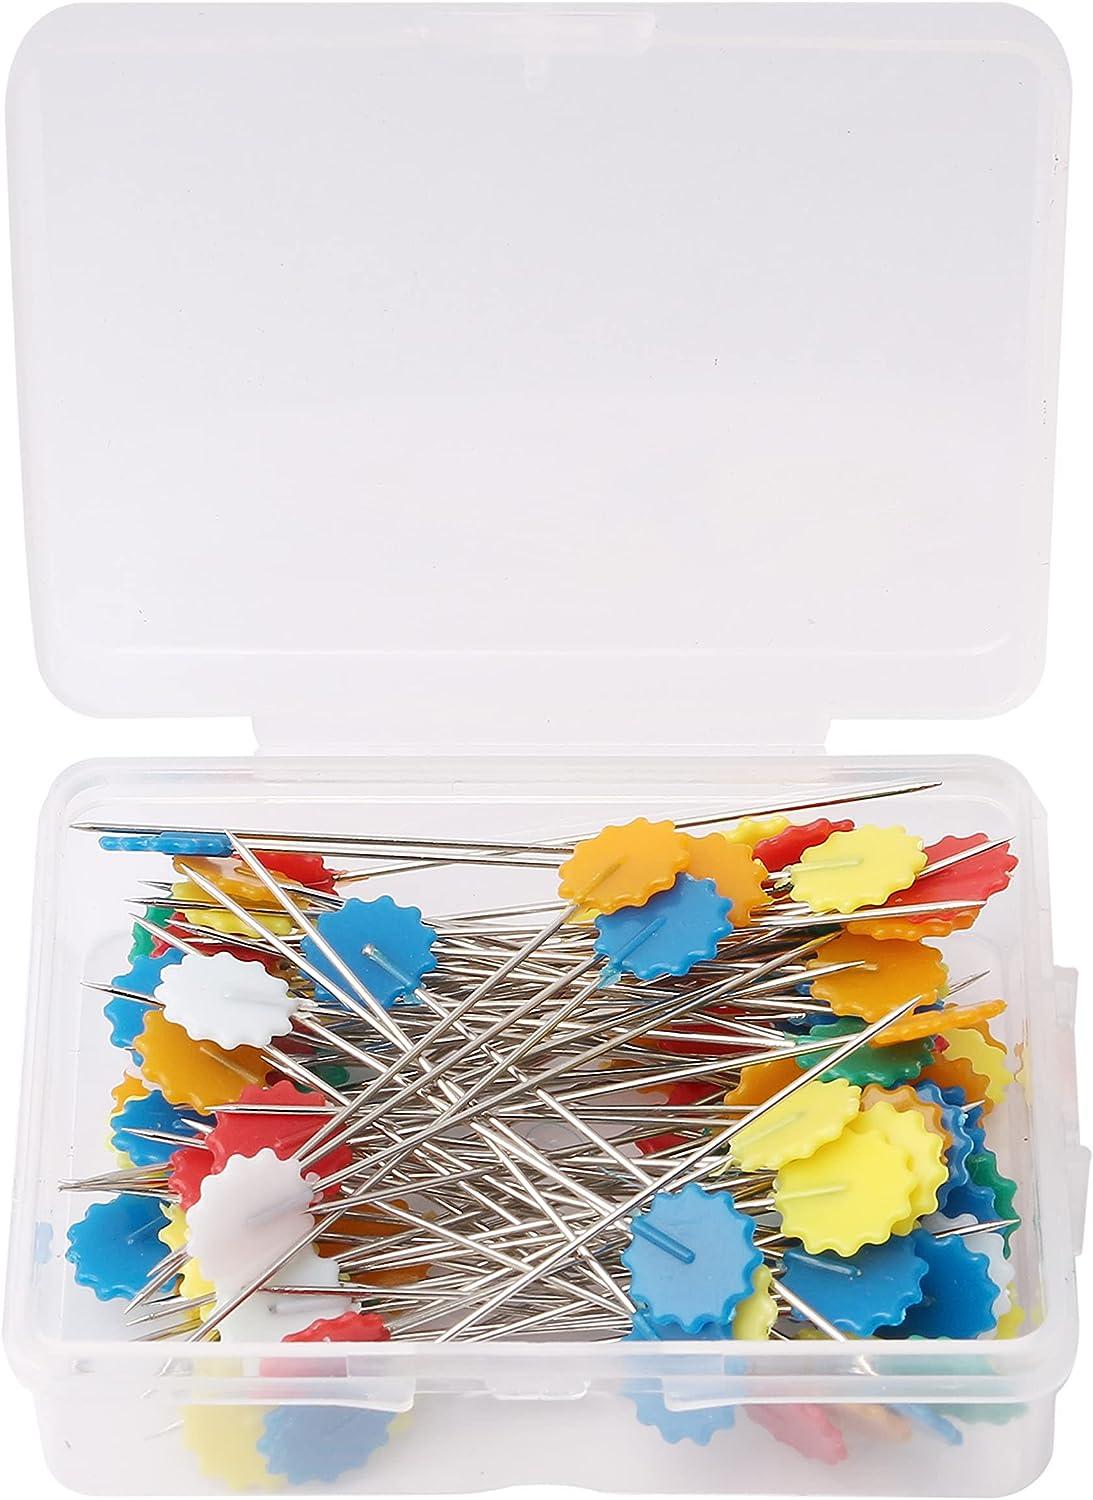 EXCEART 200pcs Sewing Pins Sewing Straight Handicraft Cloth Quilting Flower  Headpins Practical Sewing Flat Flower Handwork Sewing BLM Pin Flat Sewing